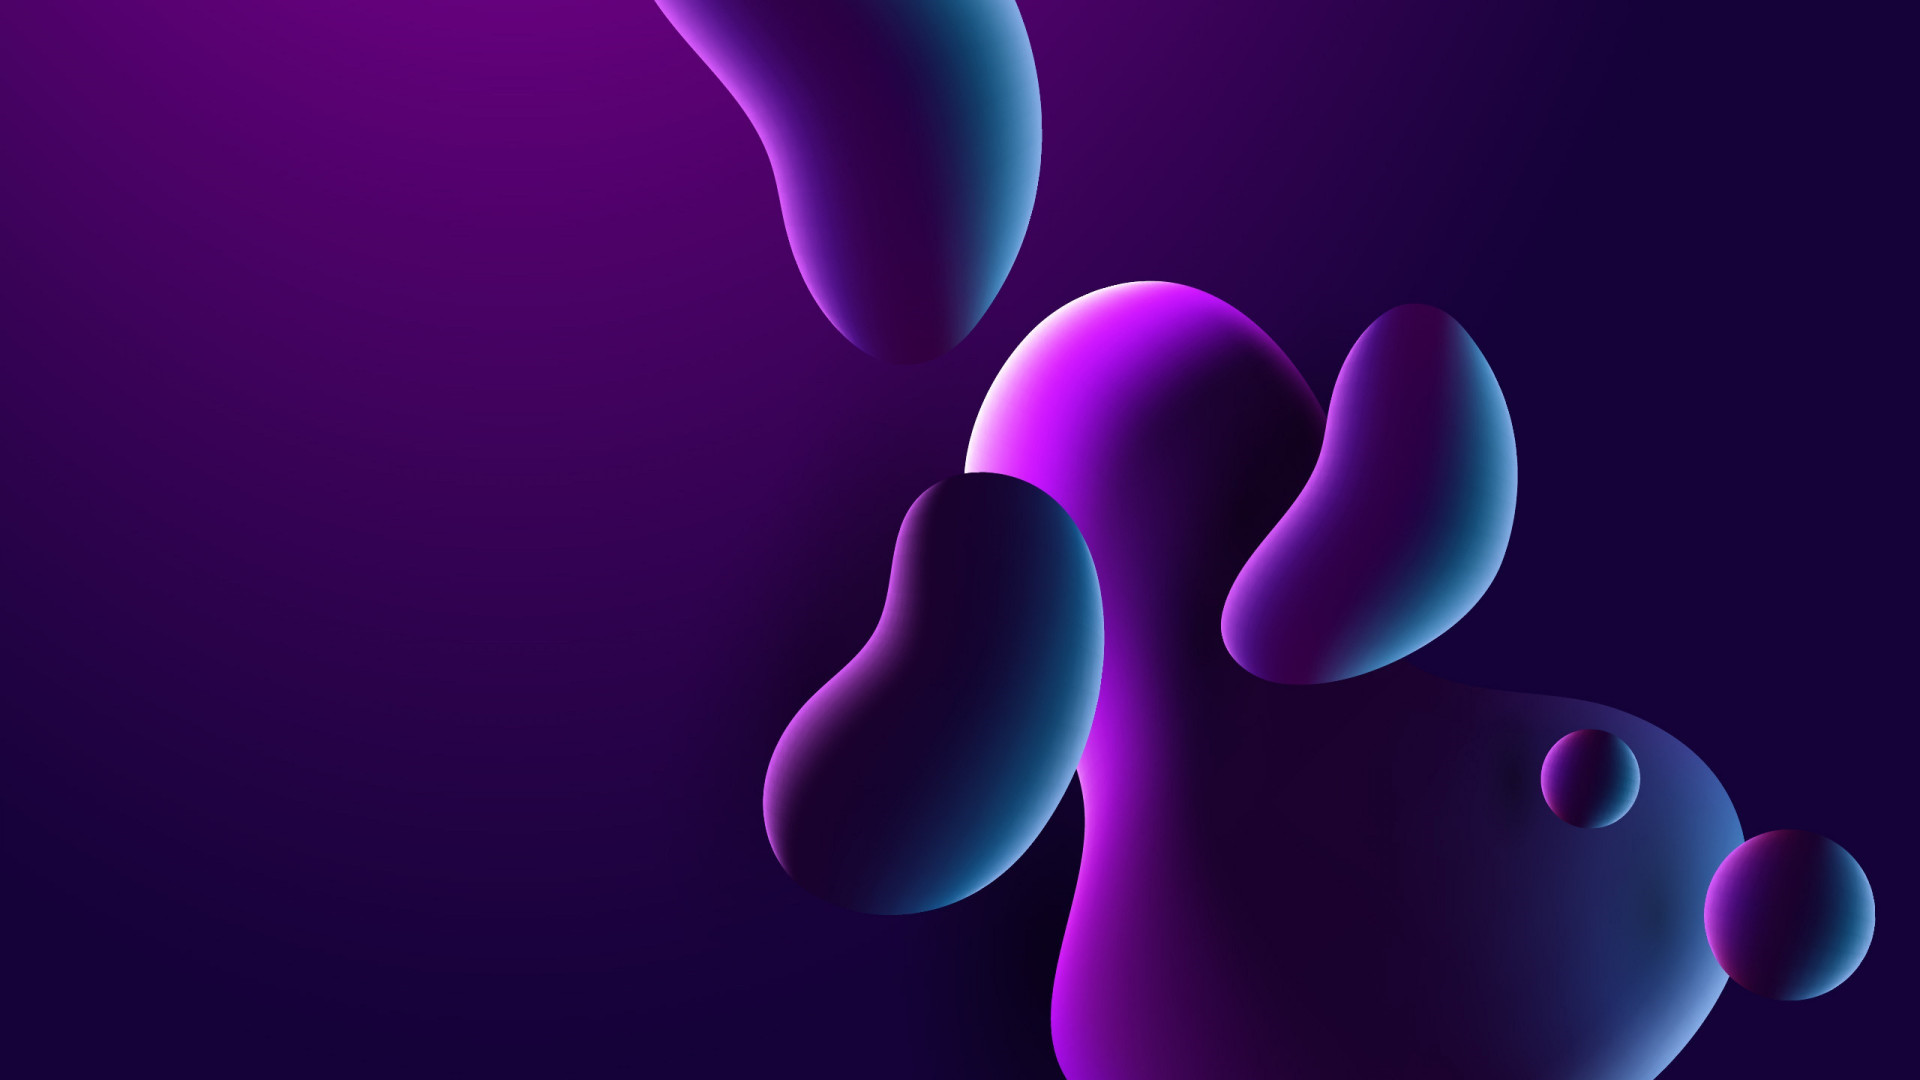 OnePlus 7T Pro, stock, bubble, abstract wallpaper 1920x1080